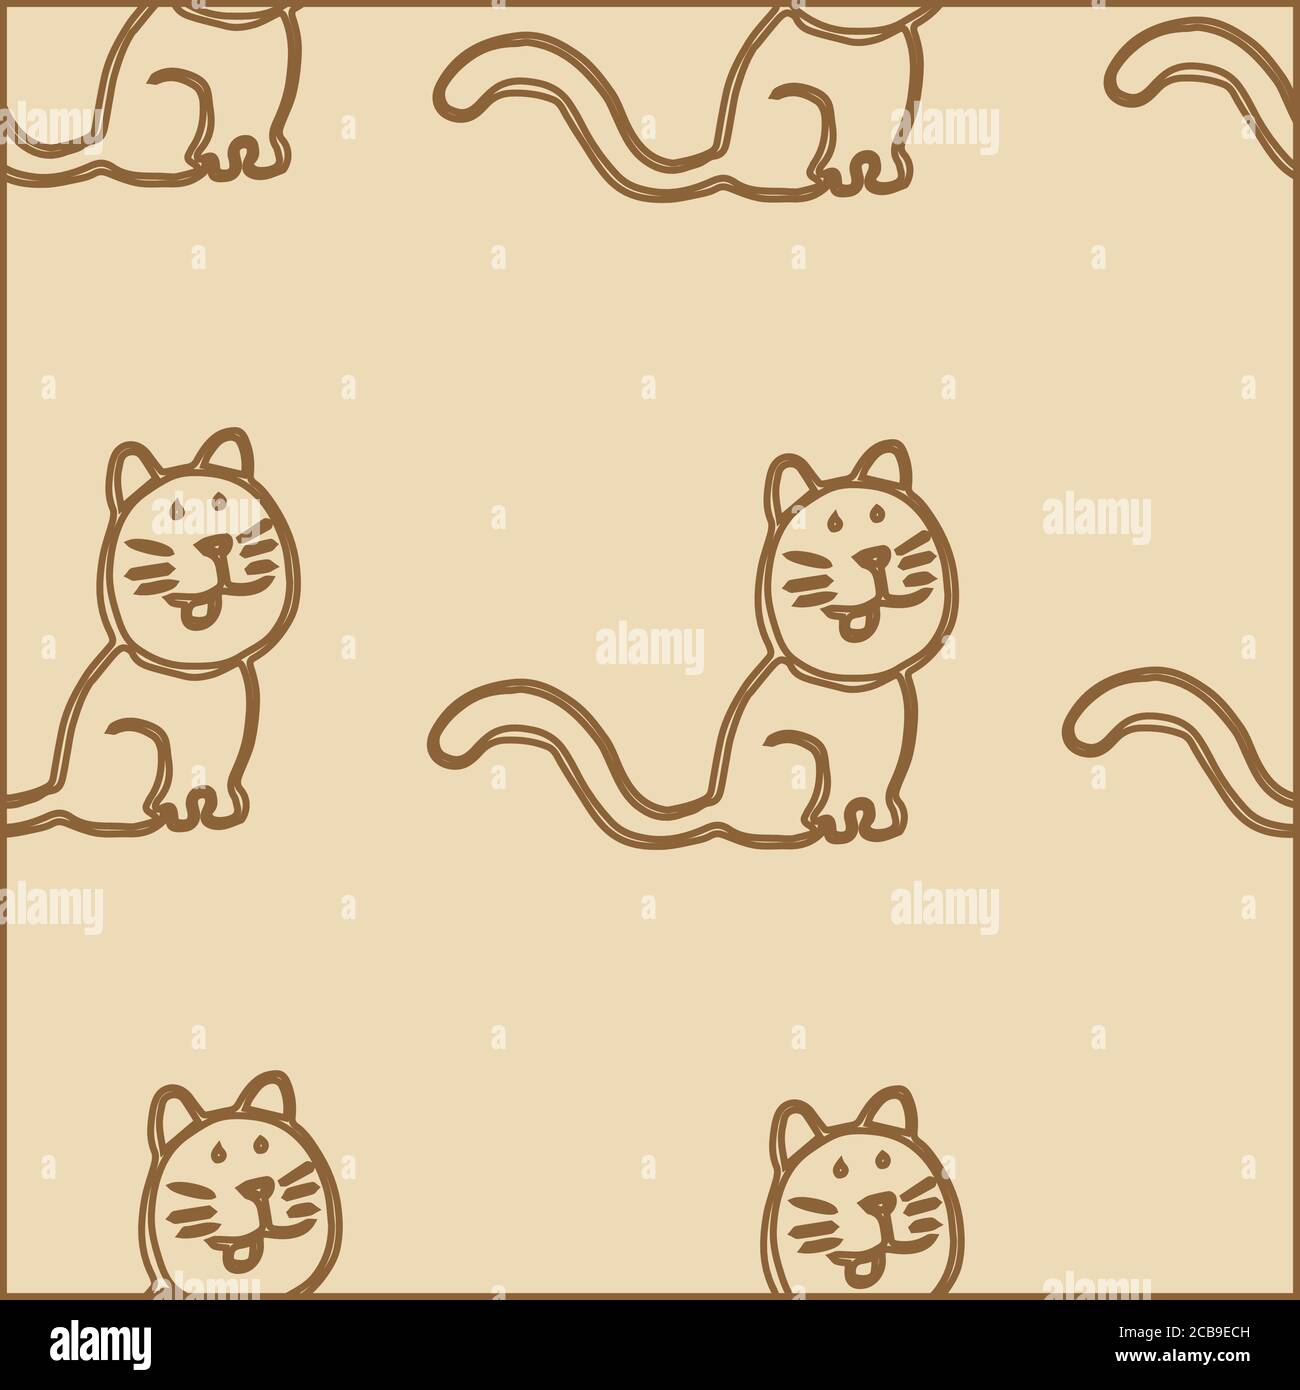 Cute cats seamless pattern background Stock Vector